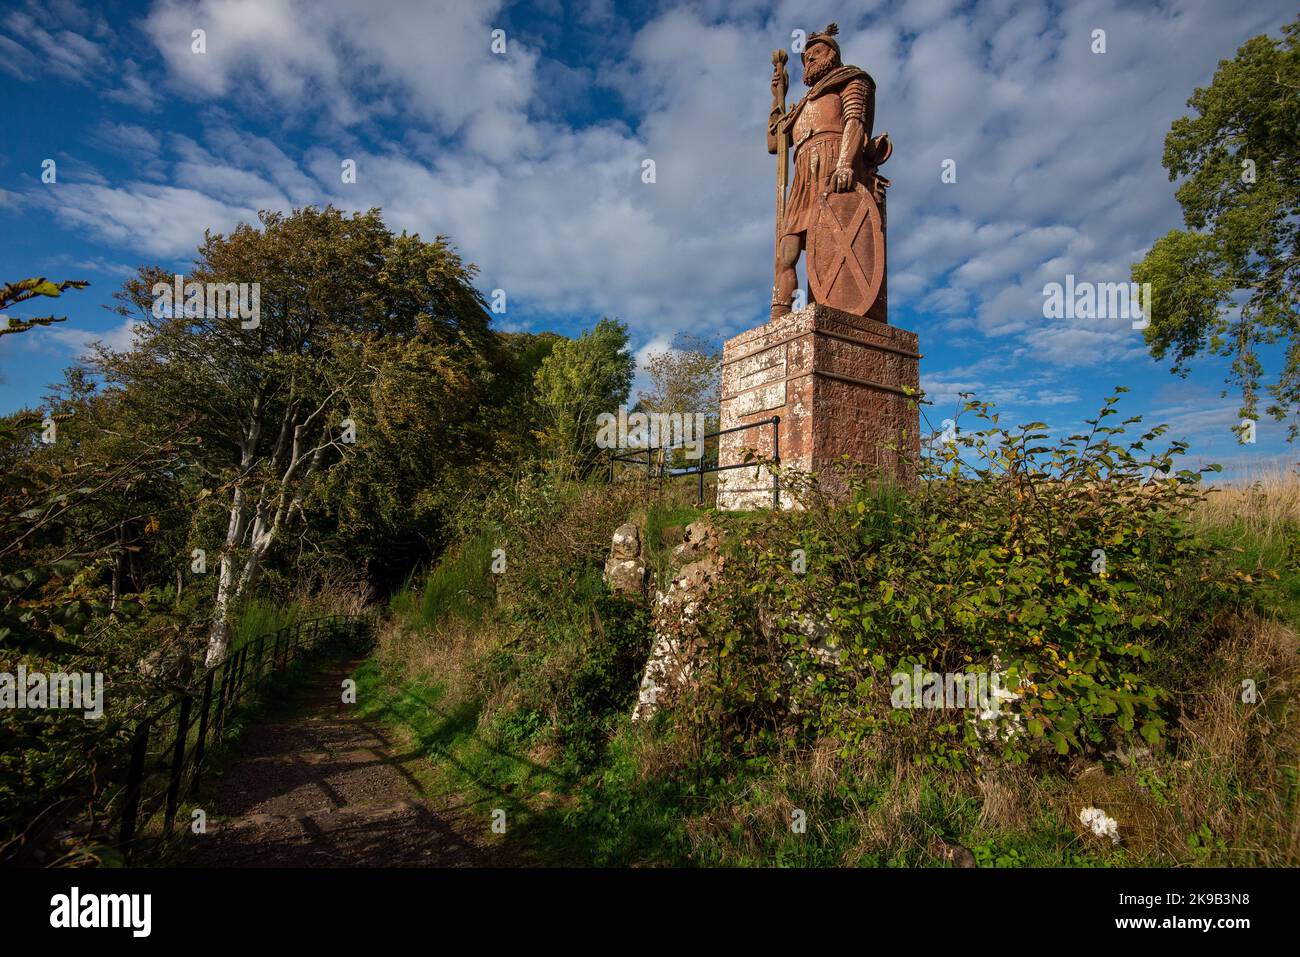 The Wallace Monument that looks out across the River Tweed in the Scottish Borders Stock Photo